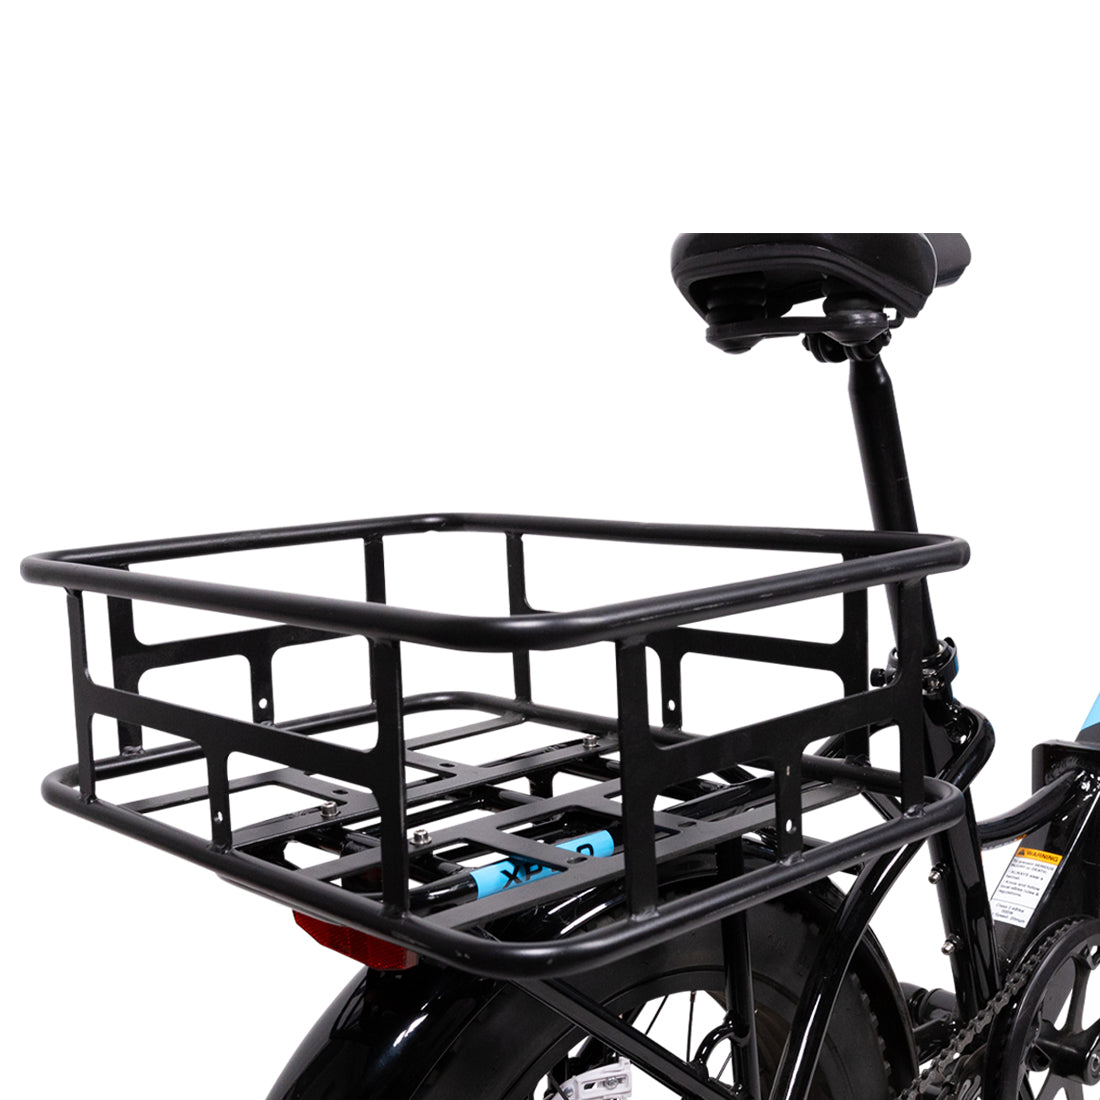 Large basket mounted on the back of a Lectric XP 3.0 ebike